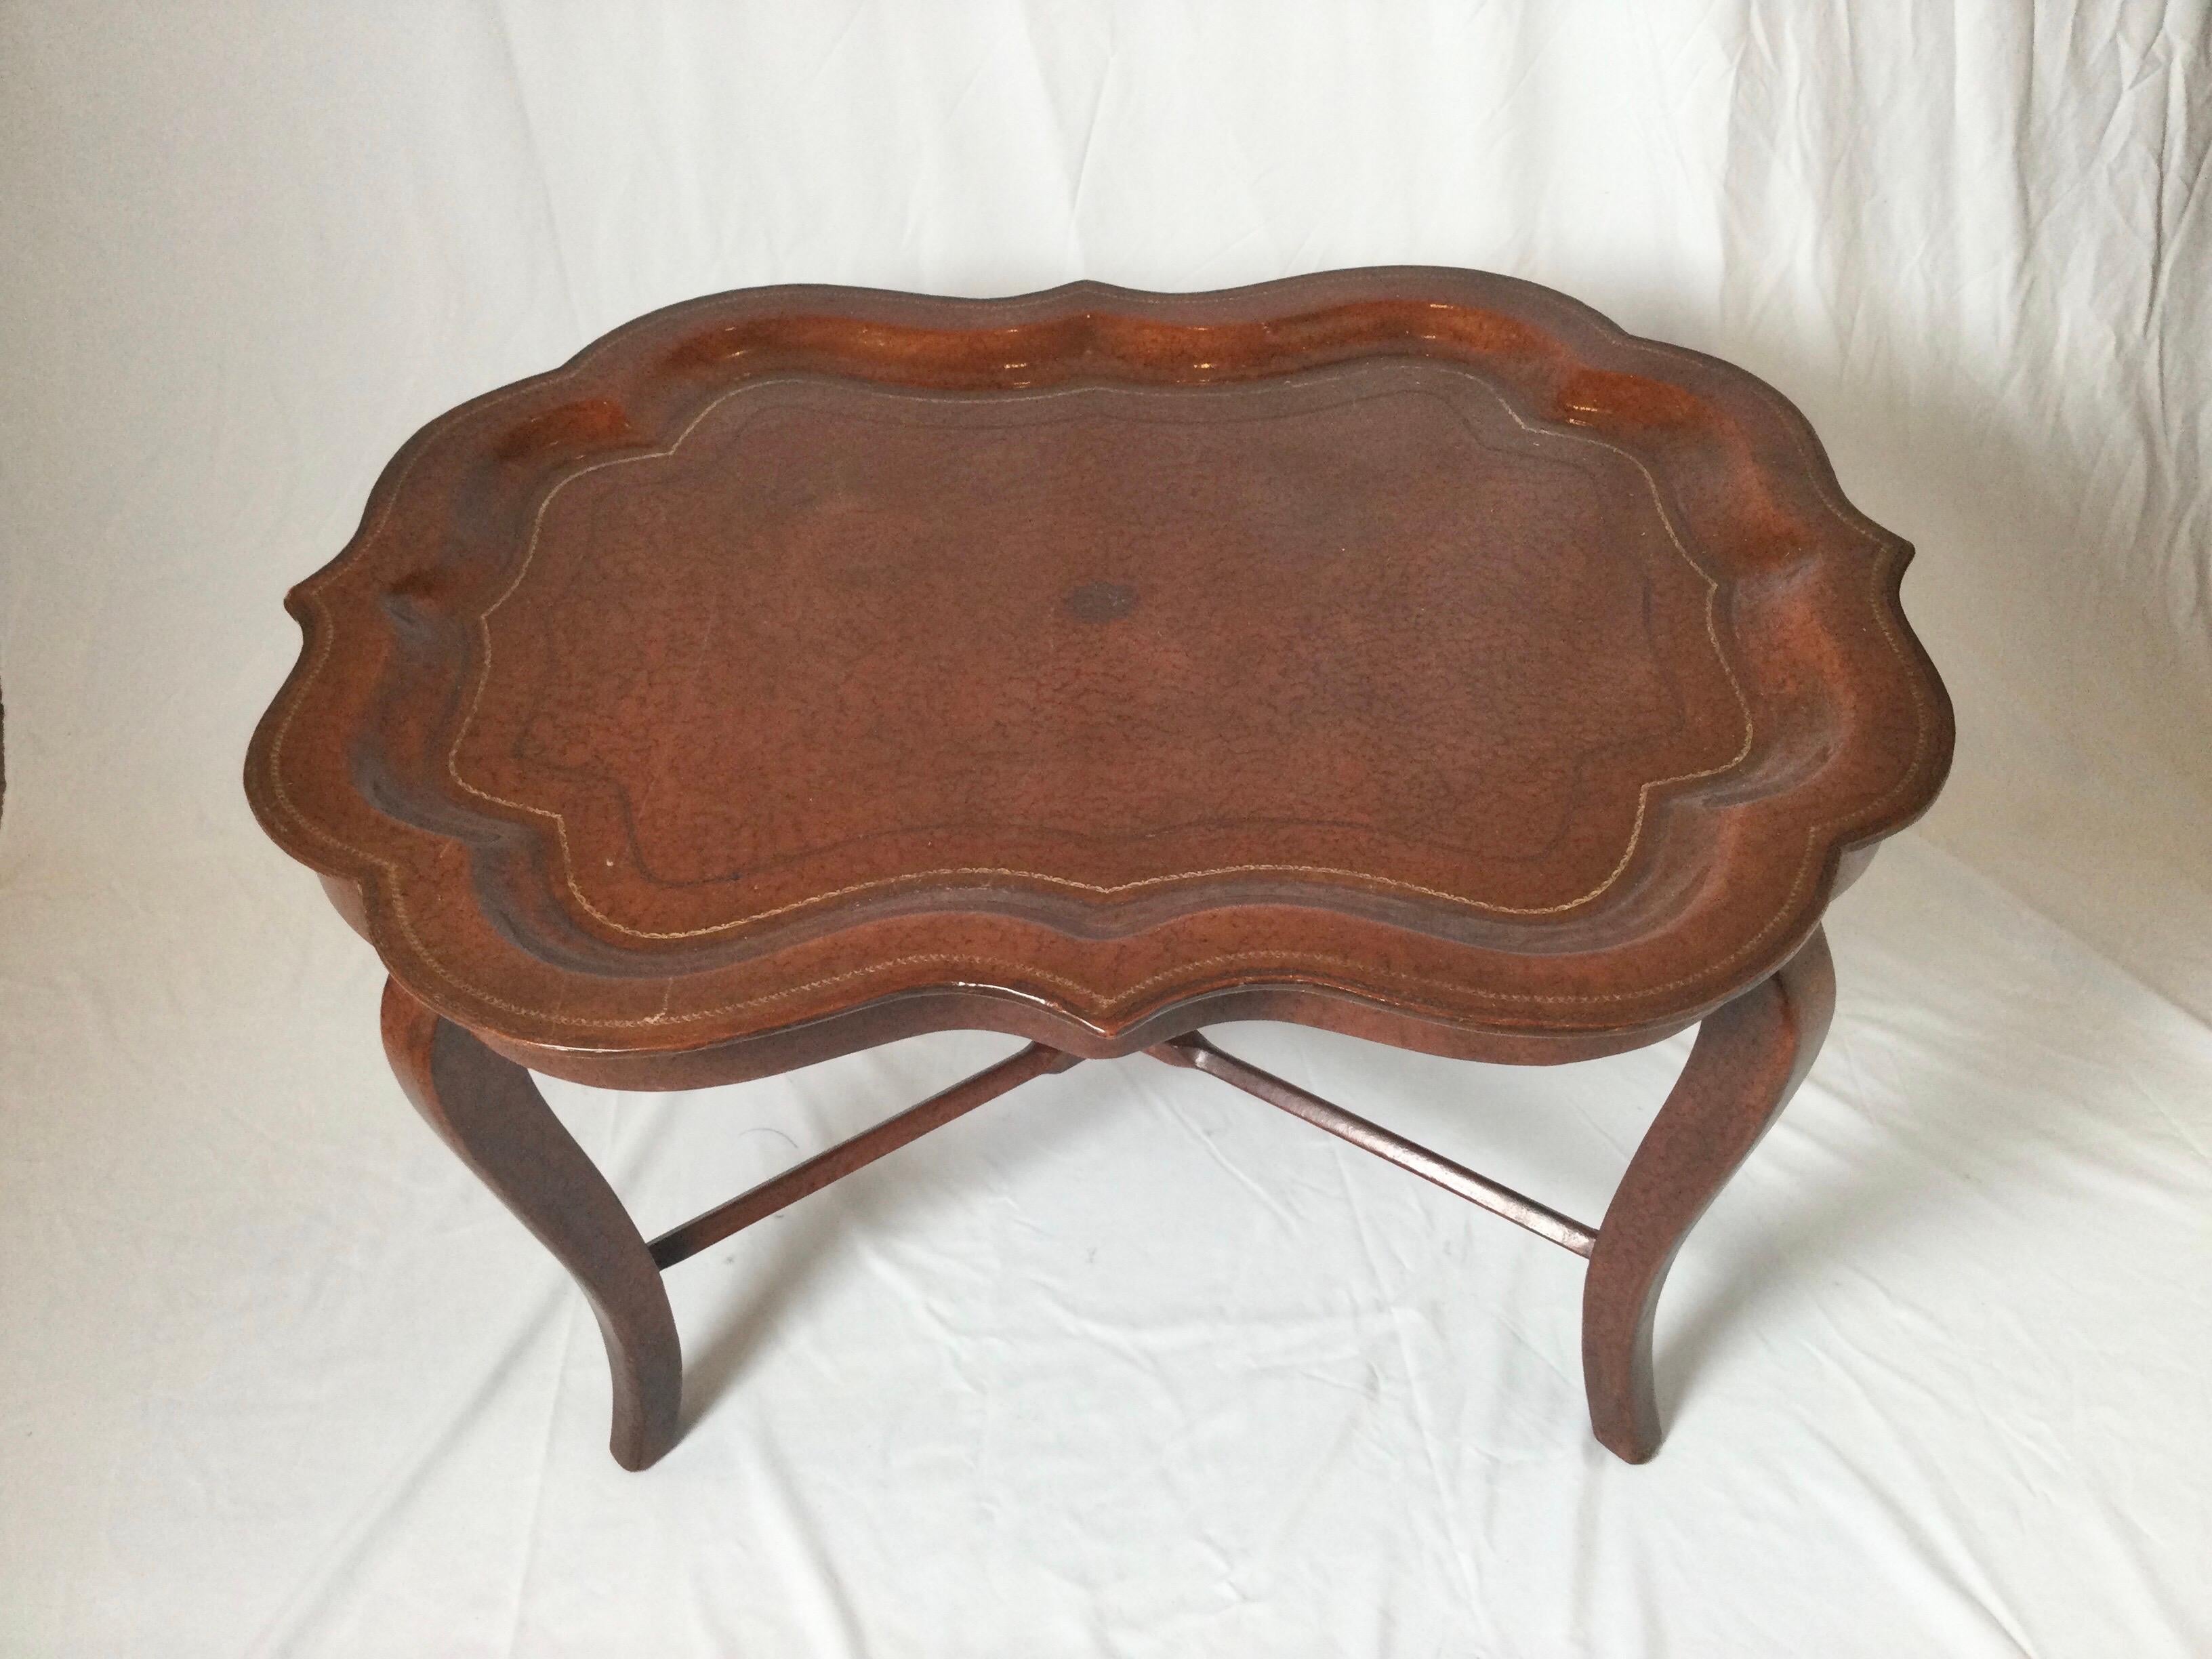 Unigue tray top table with leather surface. The scalloped tray with original base, leather covered hardwood with gilt decoration. Beautifully shaped with tray top that lifts.